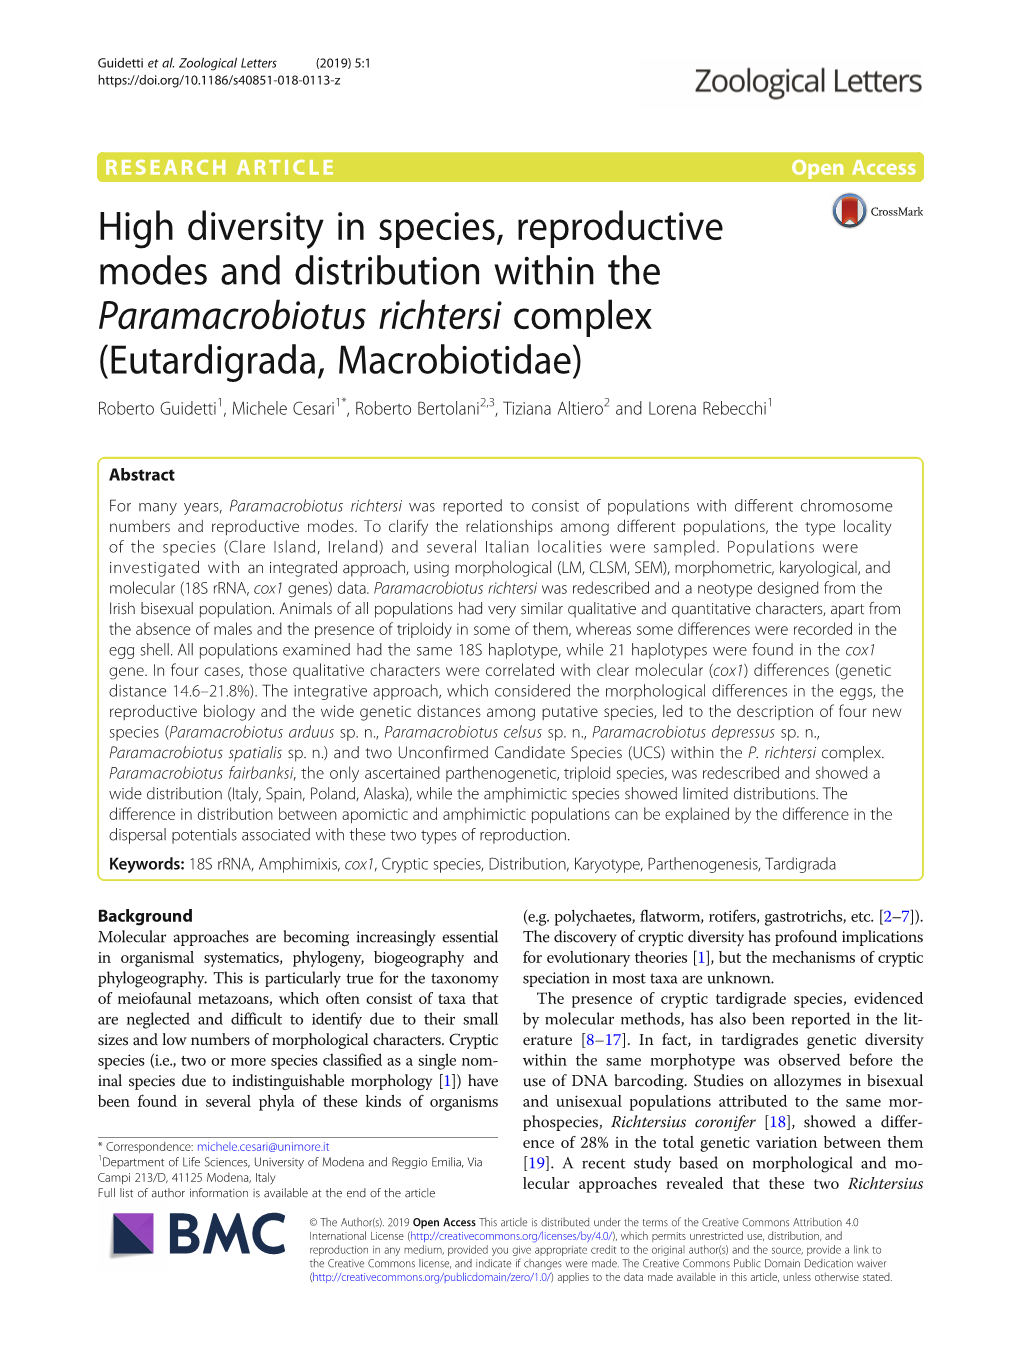 High Diversity in Species, Reproductive Modes and Distribution Within the Paramacrobiotus Richtersi Complex